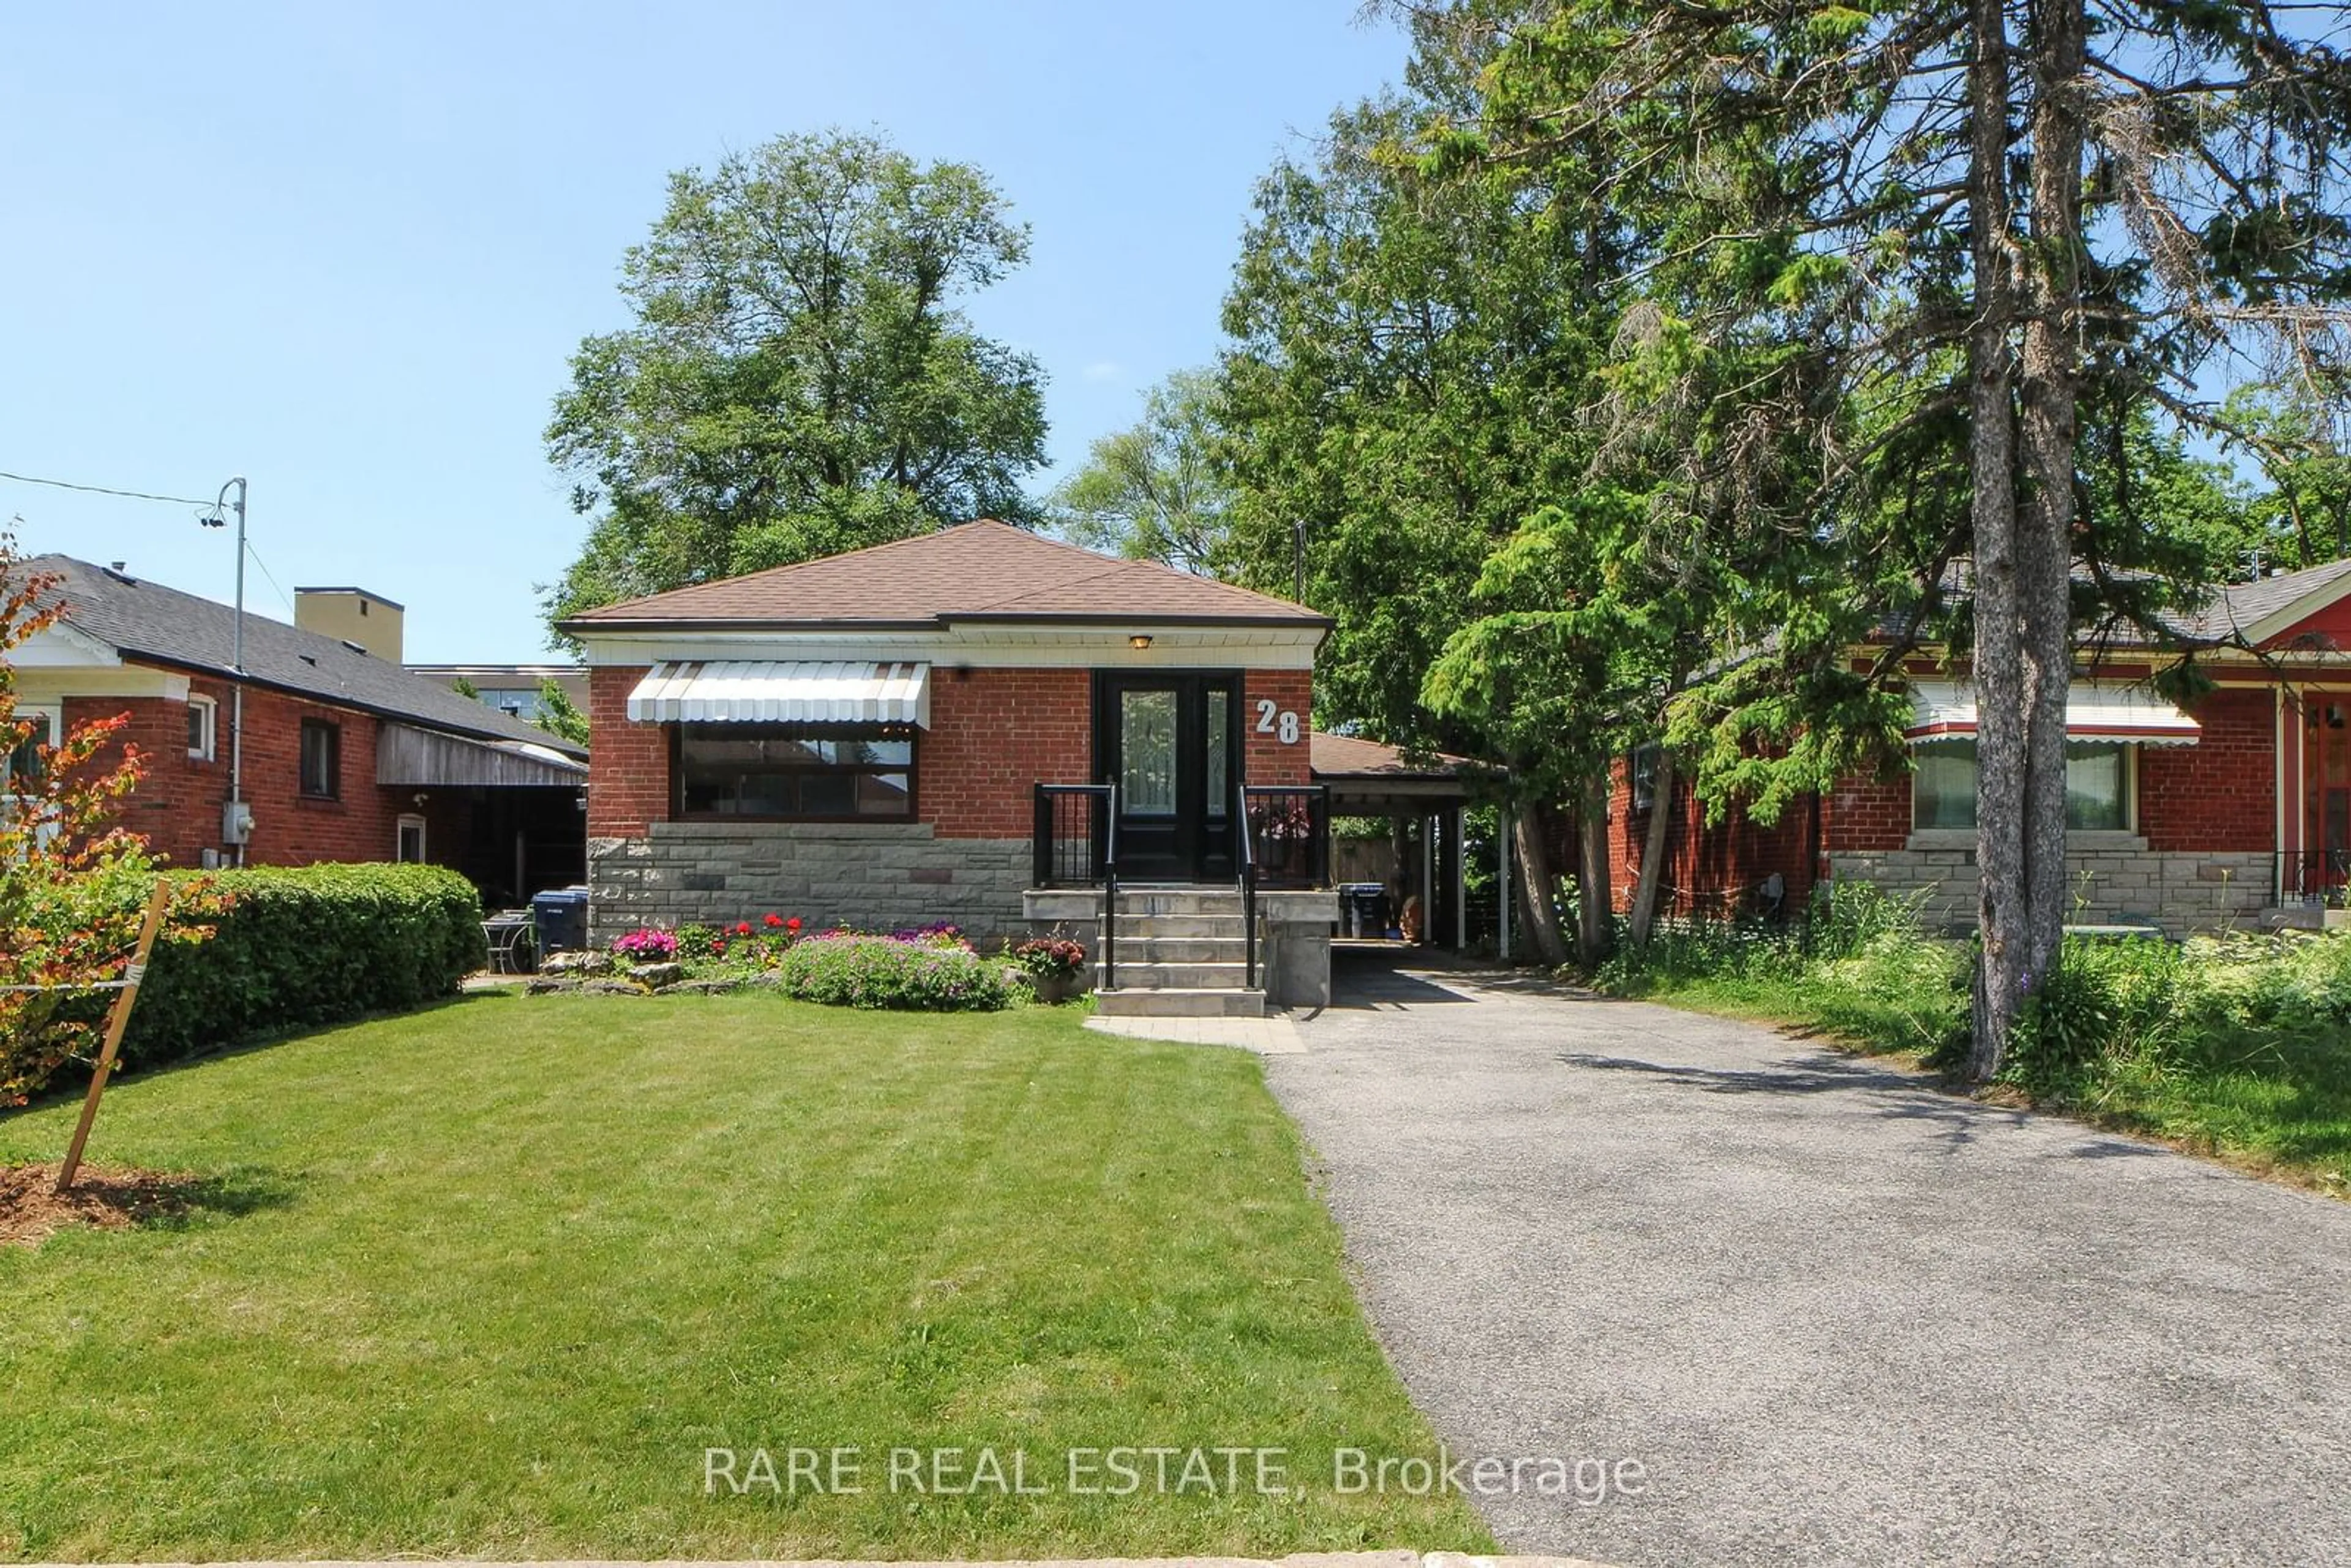 Frontside or backside of a home for 28 Burnley Ave, Toronto Ontario M1R 2M4